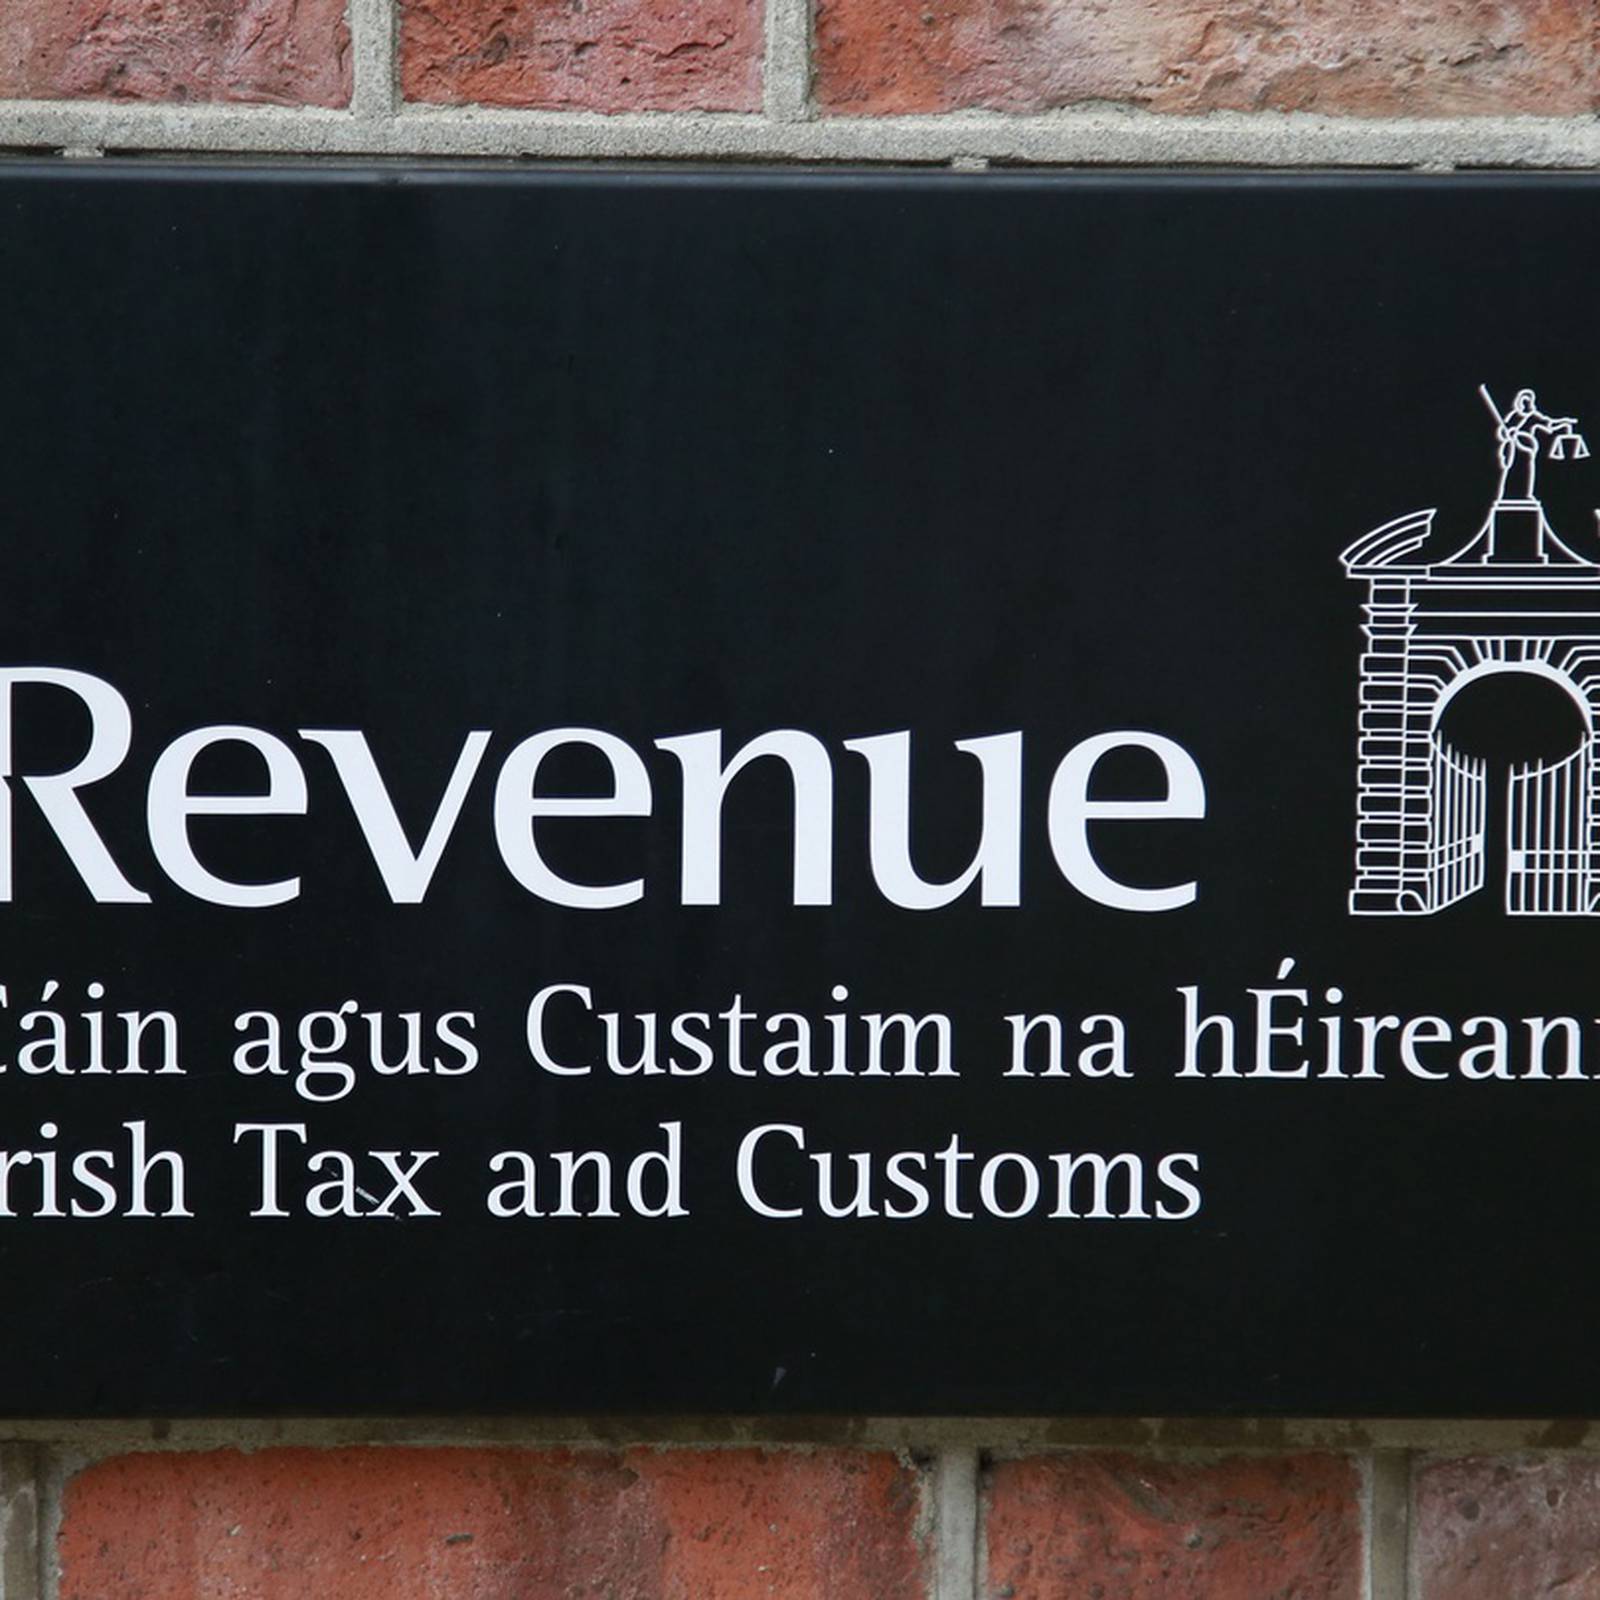 How To File a Capital Gains Tax Return in Ireland - CG1 Form (Step